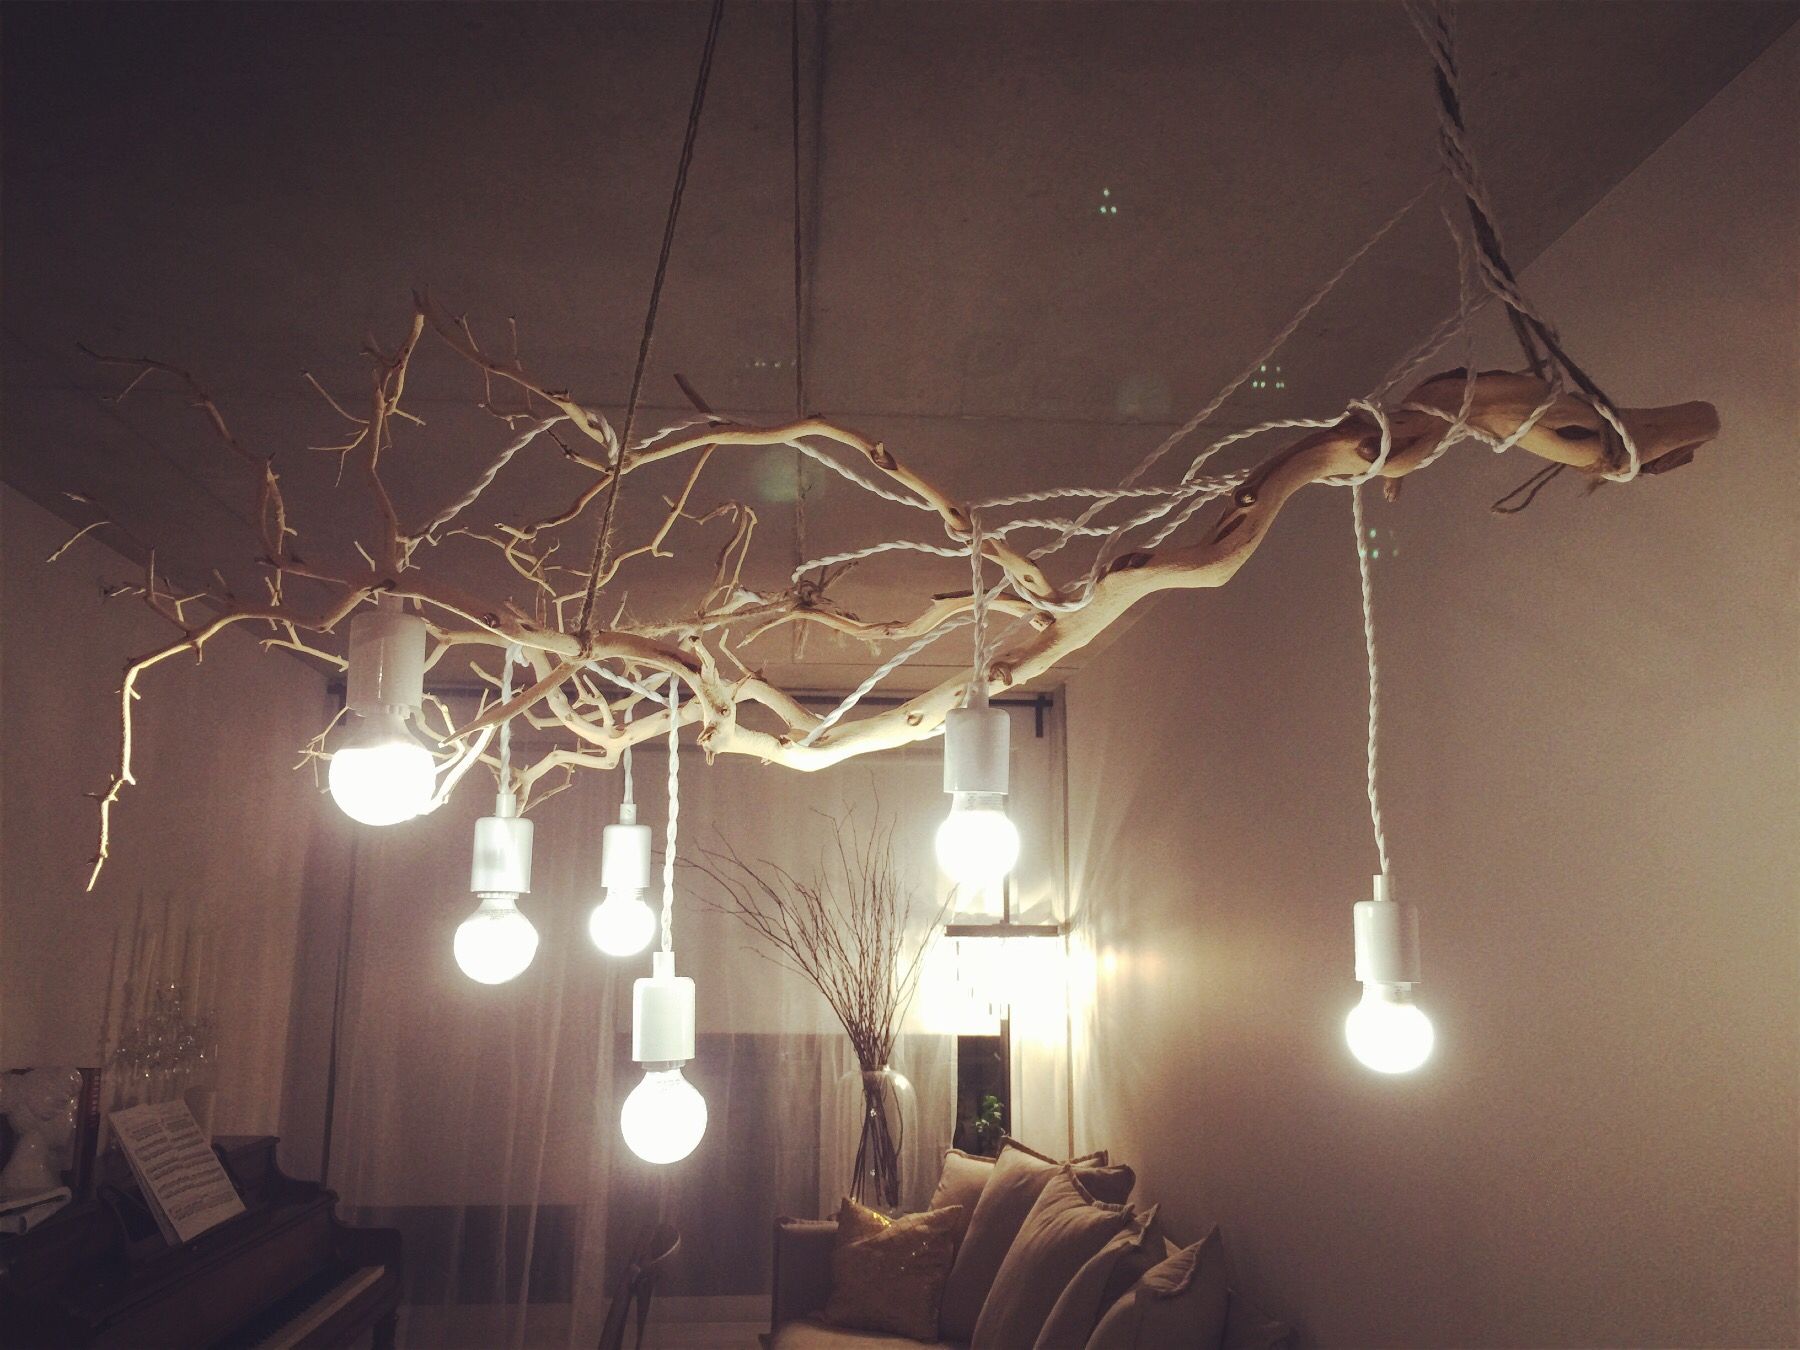 My Favourite Diy Branch Chandelier Made Just Branches And Throughout Branch Chandeliers (Photo 10 of 12)